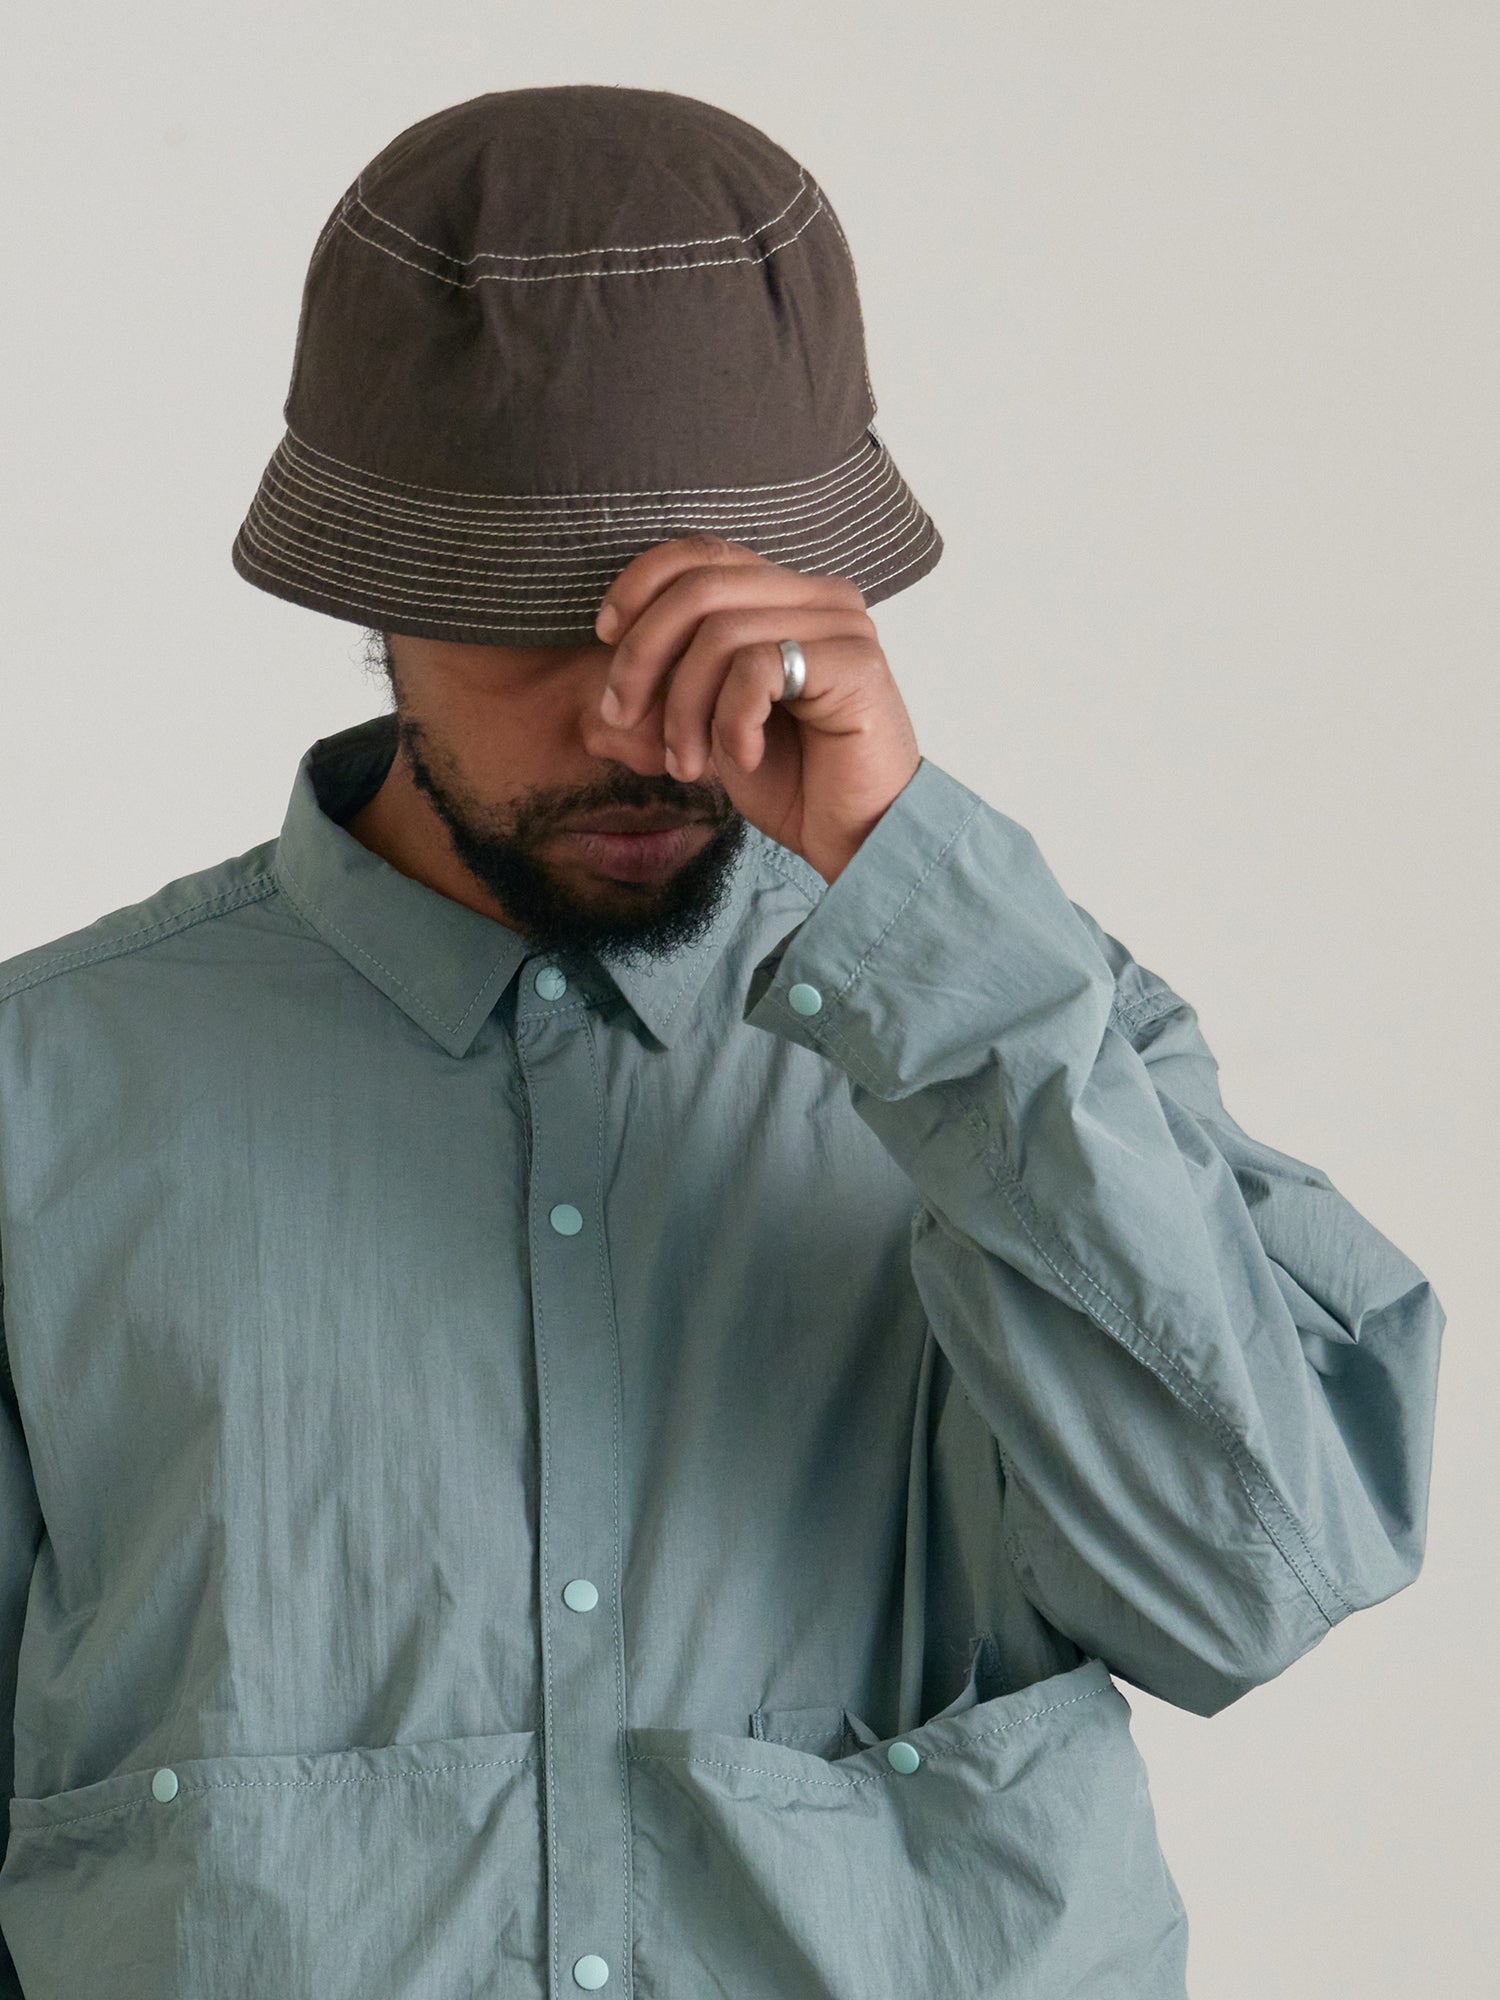 ENDS and MEANS Bucket Hat – CUXTON HOUSE